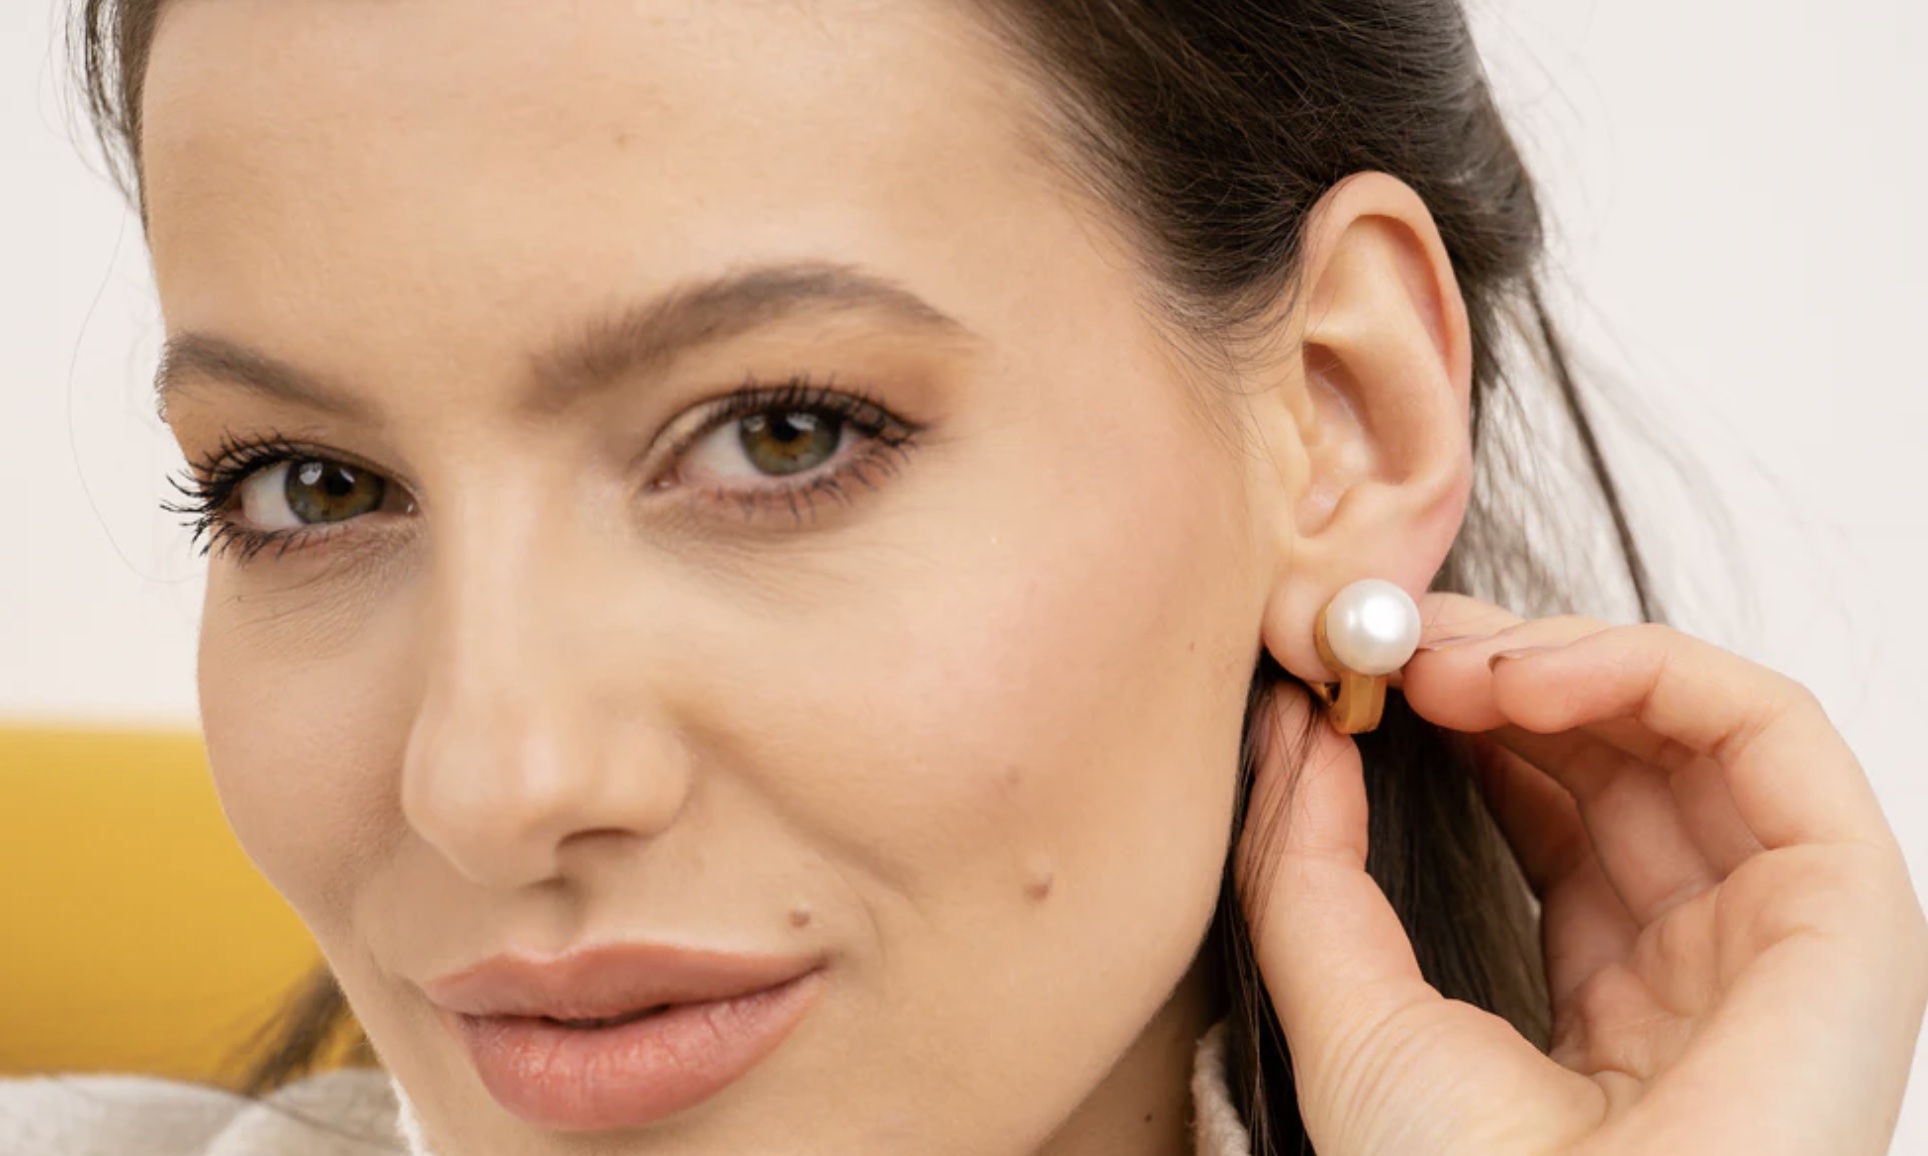 These Pearl Earrings Are Secretly Wireless Earbuds